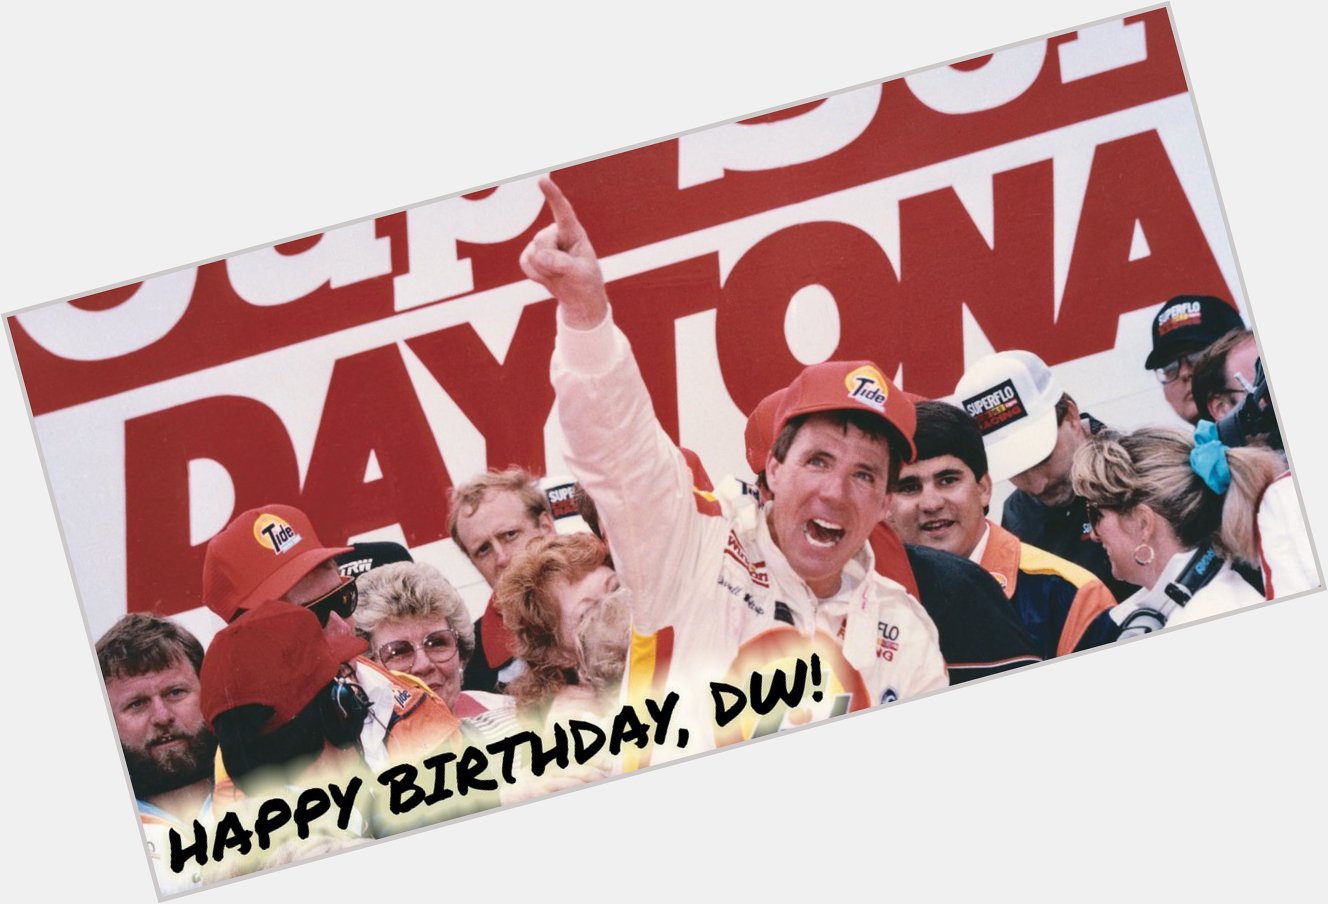 Join us in wishing one of our good friends, and of Famer Darrell Waltrip, a very happy birthday! 